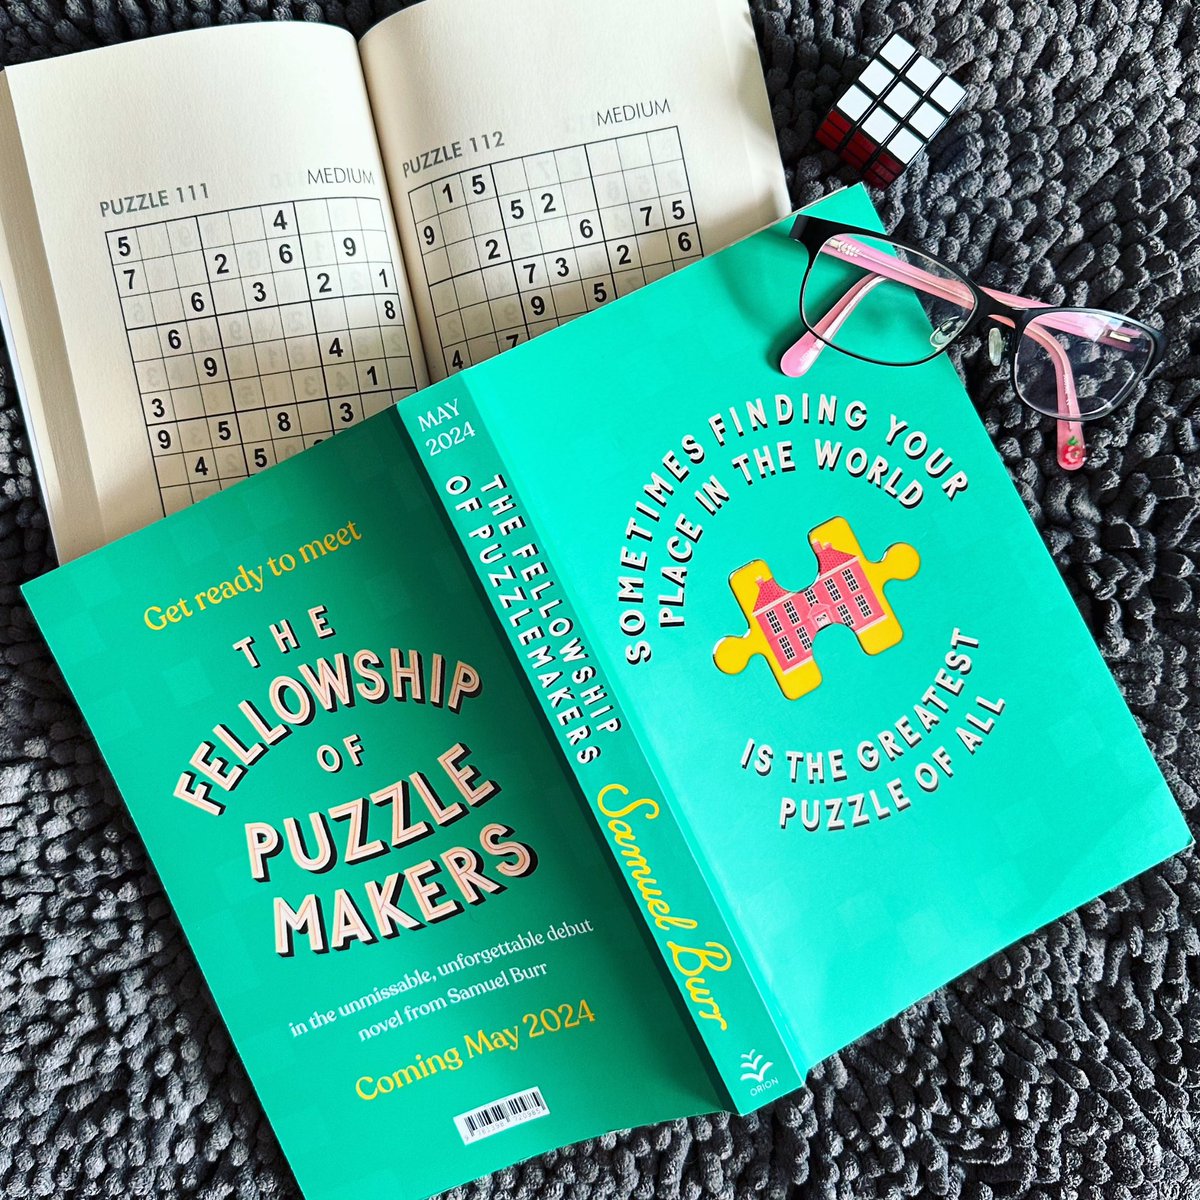 📚HAPPY PUBLICATION DAY!📚

Today is the day when the wonderful #TheFellowshipOfPuzzlemakers by @samuelburr is released for everyone to enjoy🧩

This is one of my books of the year, go & buy a copy today!😍

Full Review 🔗 shorturl.at/iBHK4

#BookTwitter #PublicationDay